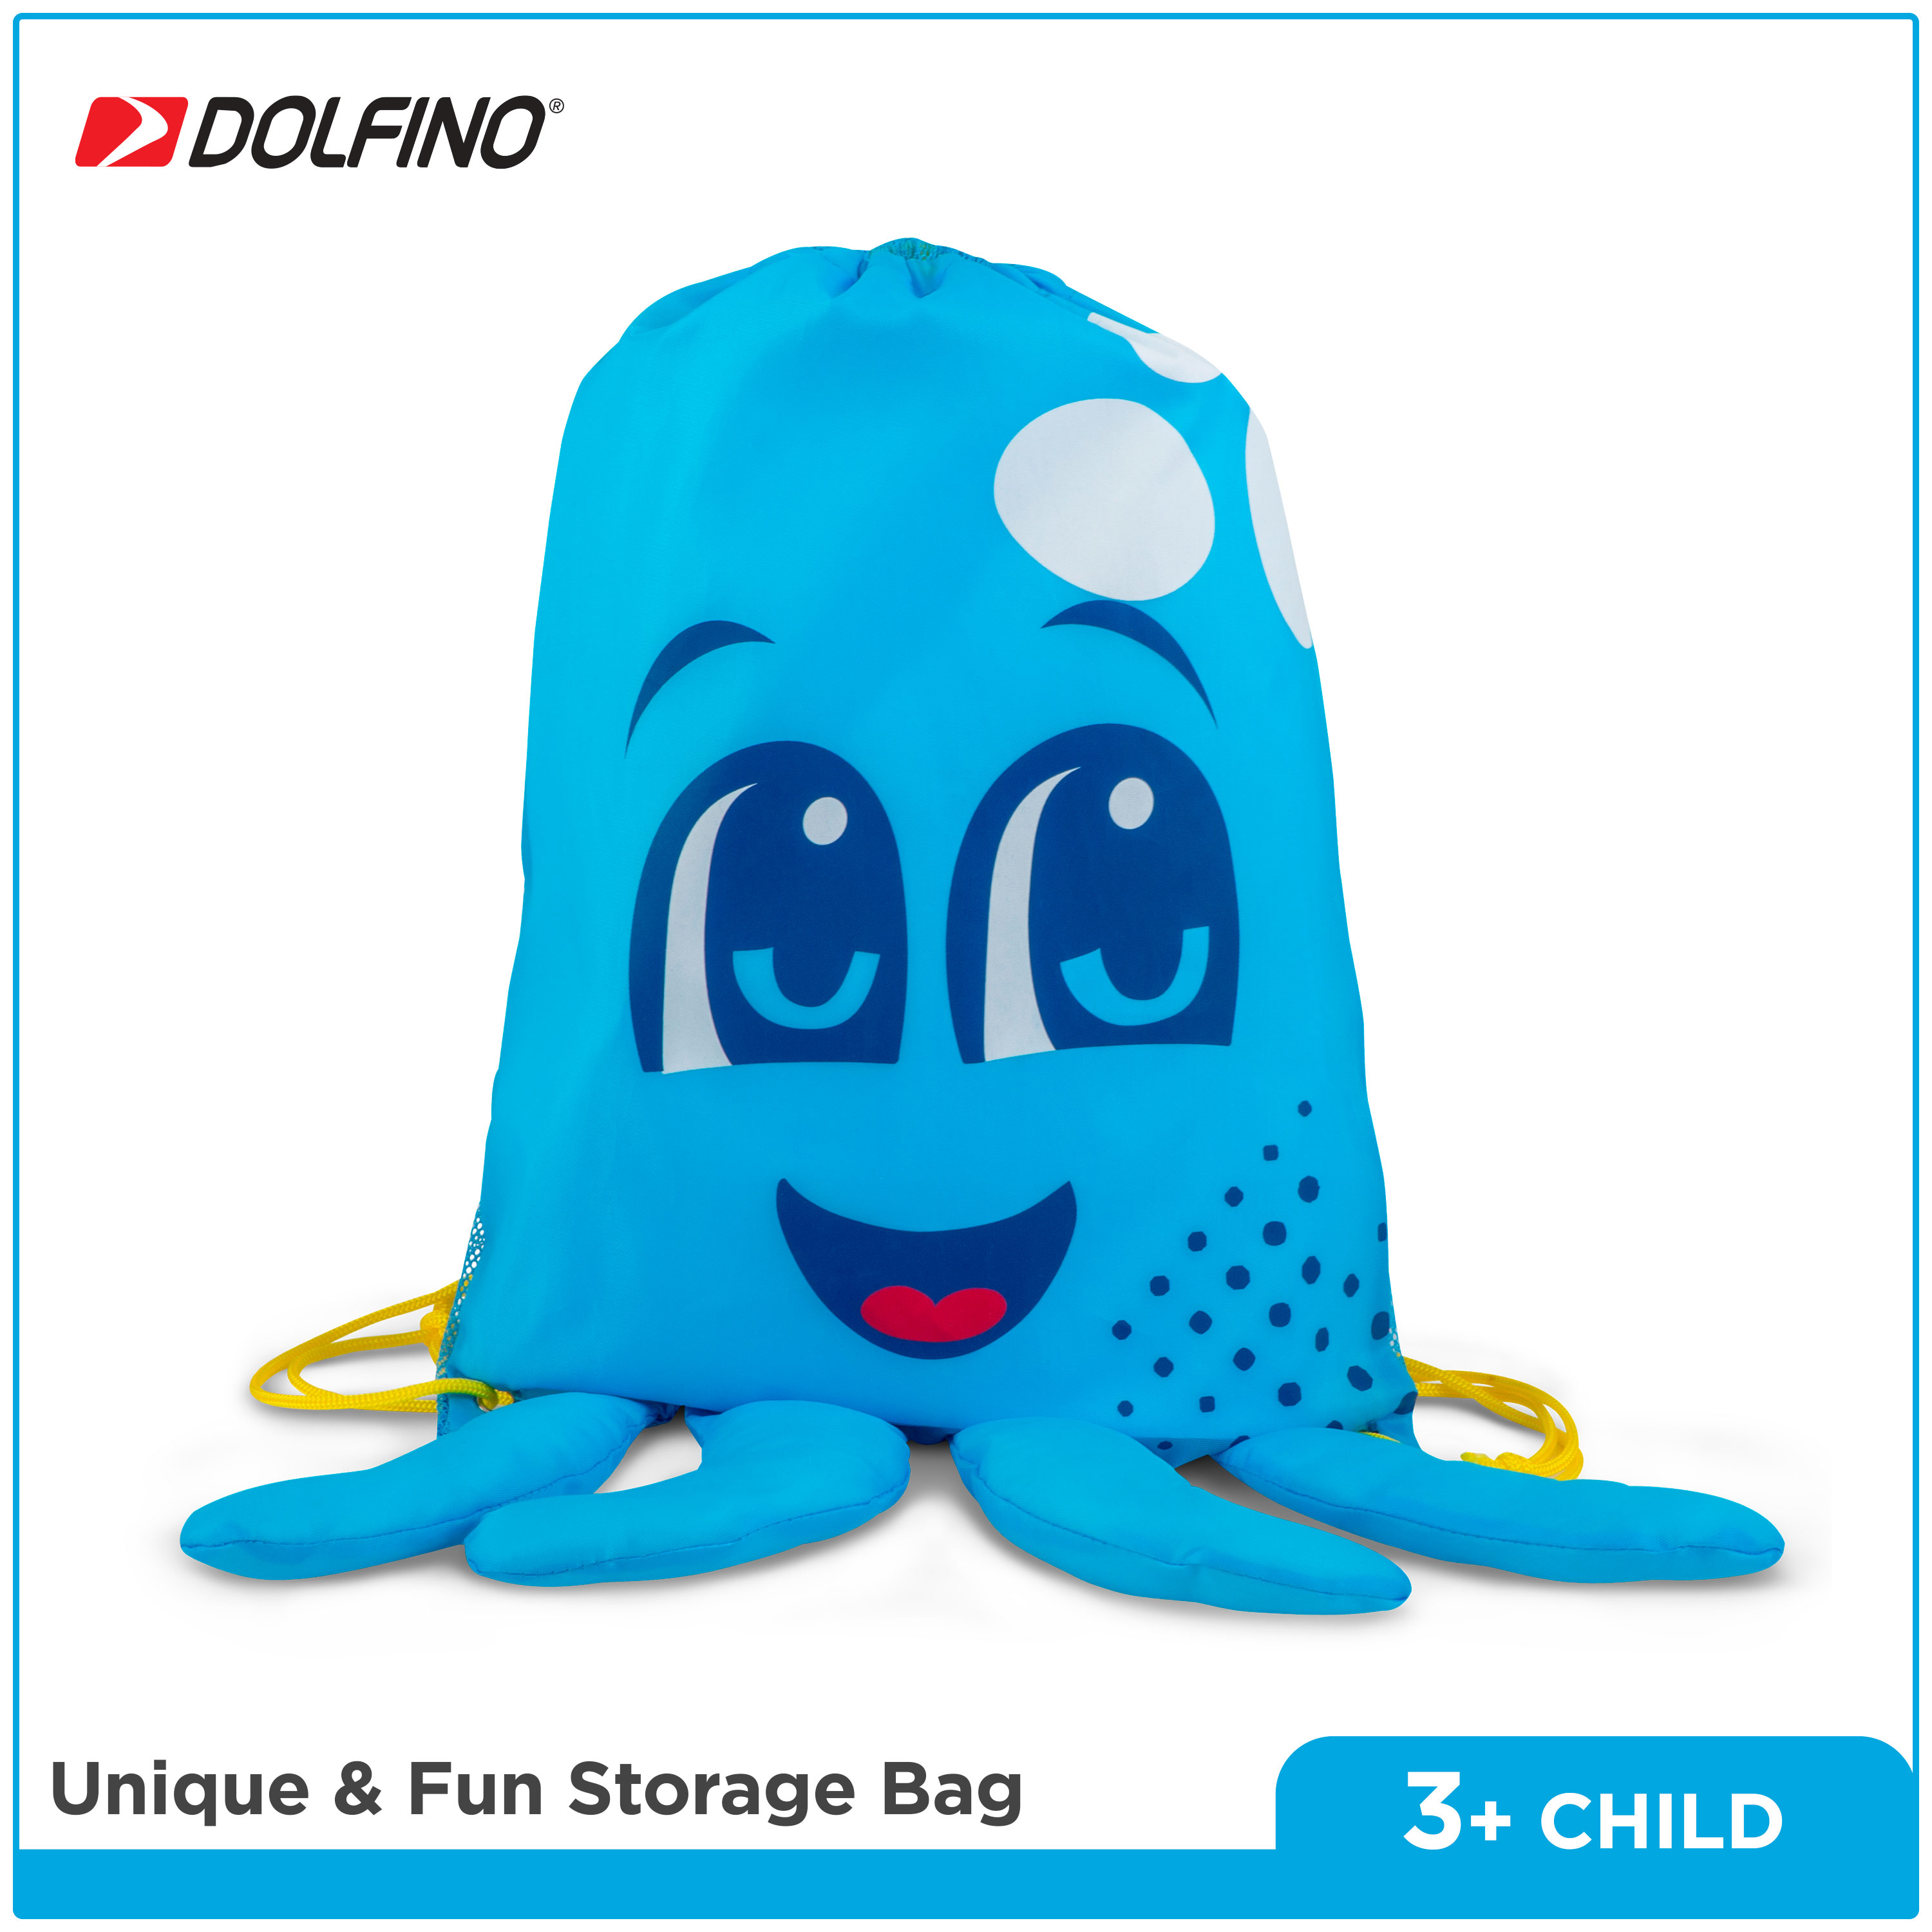 Dolfino Octopus Blue Unisex Dive Set for Children, Includes 5 Pieces, Hypoallergenic and Latex-Free - image 2 of 8